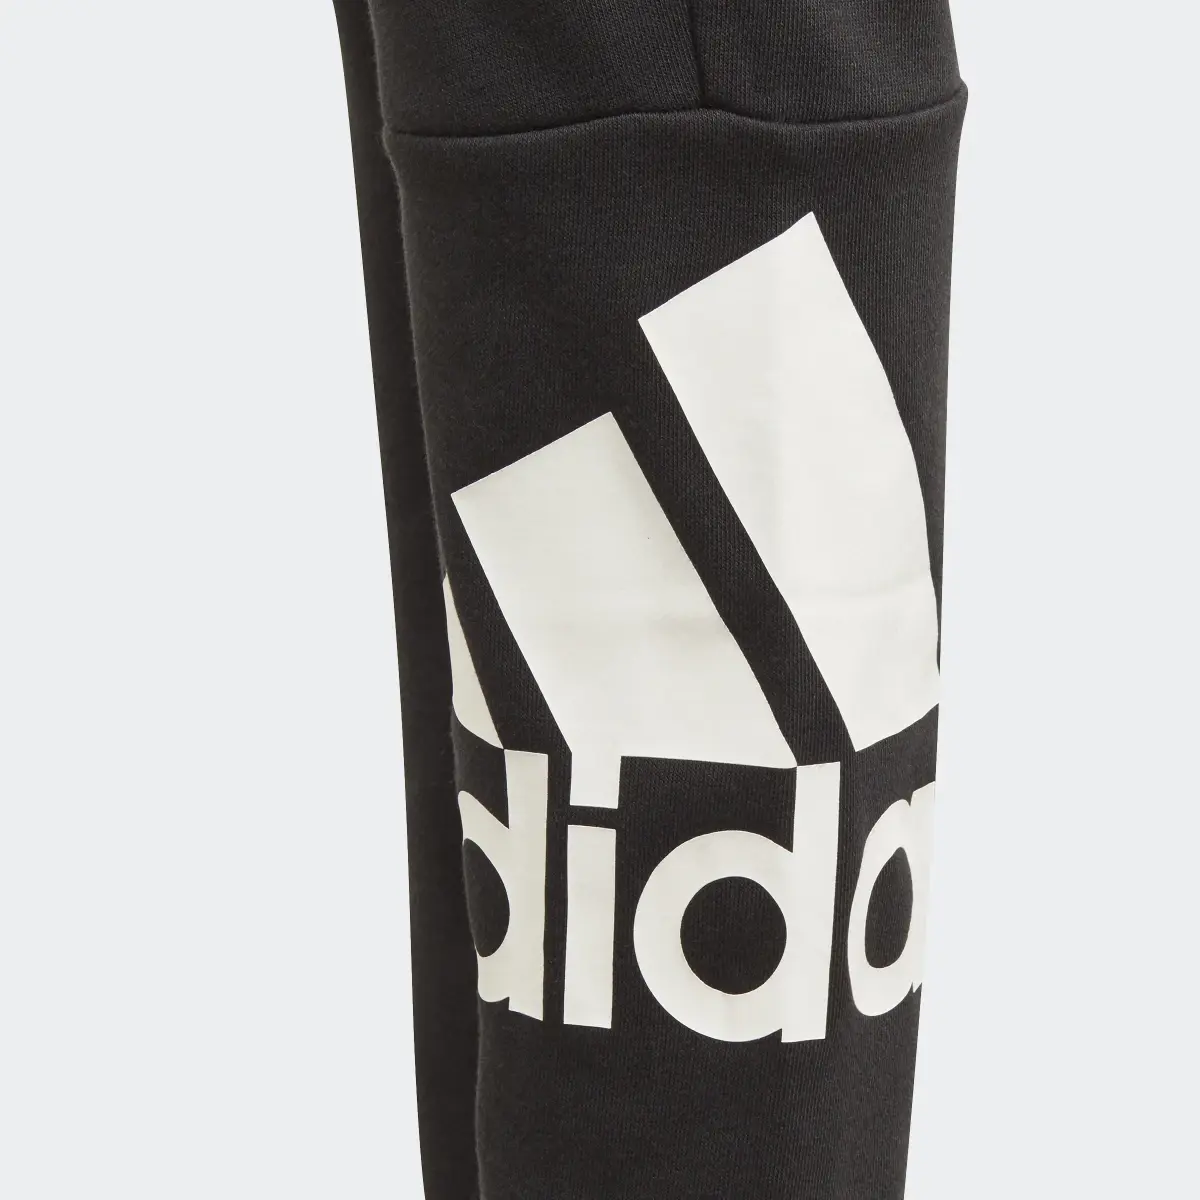 Adidas Essentials French Terry Pants. 3